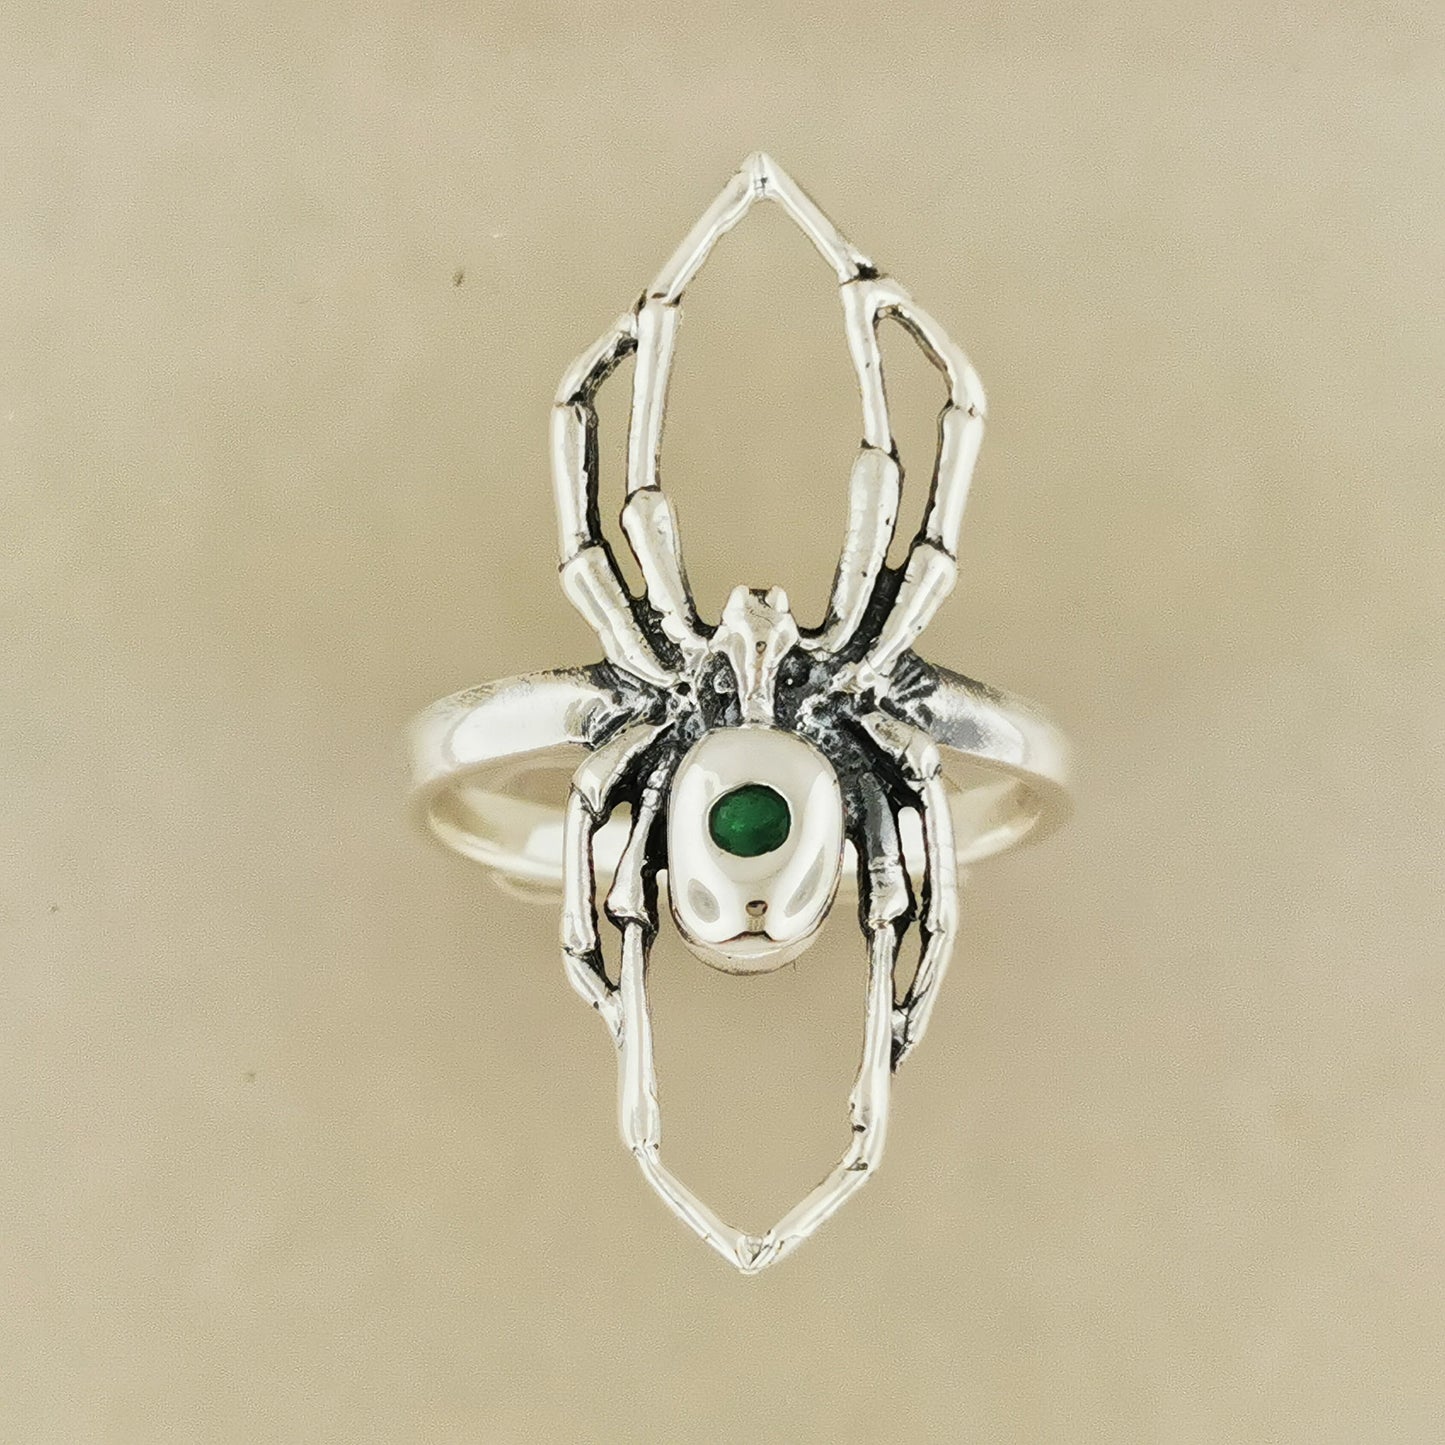 Spider ring with Gemstone in 925 Sterling Silver, Birthstone Spider Ring, Gothic Spider Ring, Spider Jewelry, 3D Spider Jewellery Gift, Silver Spider Ring, Gemstone Spider Ring, Black Widow Spider Ring, 3D Spider Ring, Silver Birthstone Spider Ring